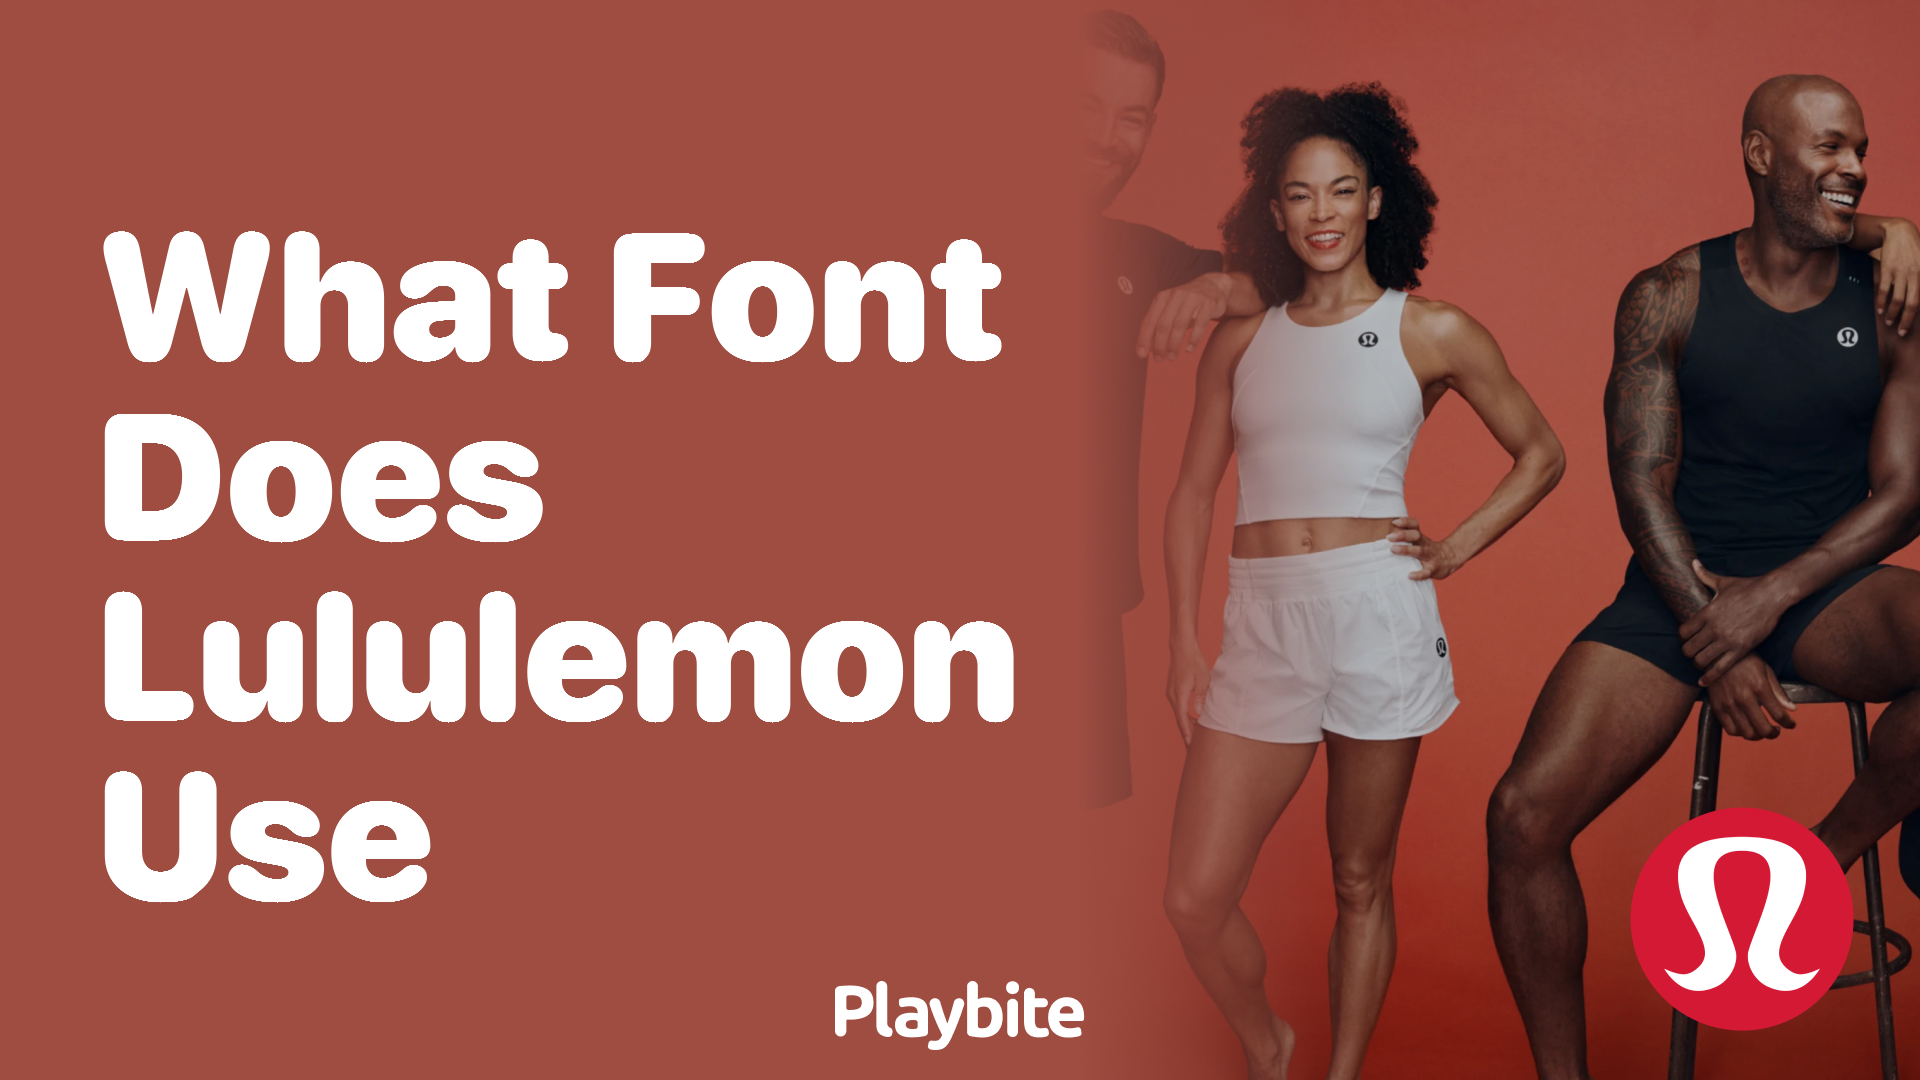 What Font Does Lululemon Use in Their Branding? - Playbite